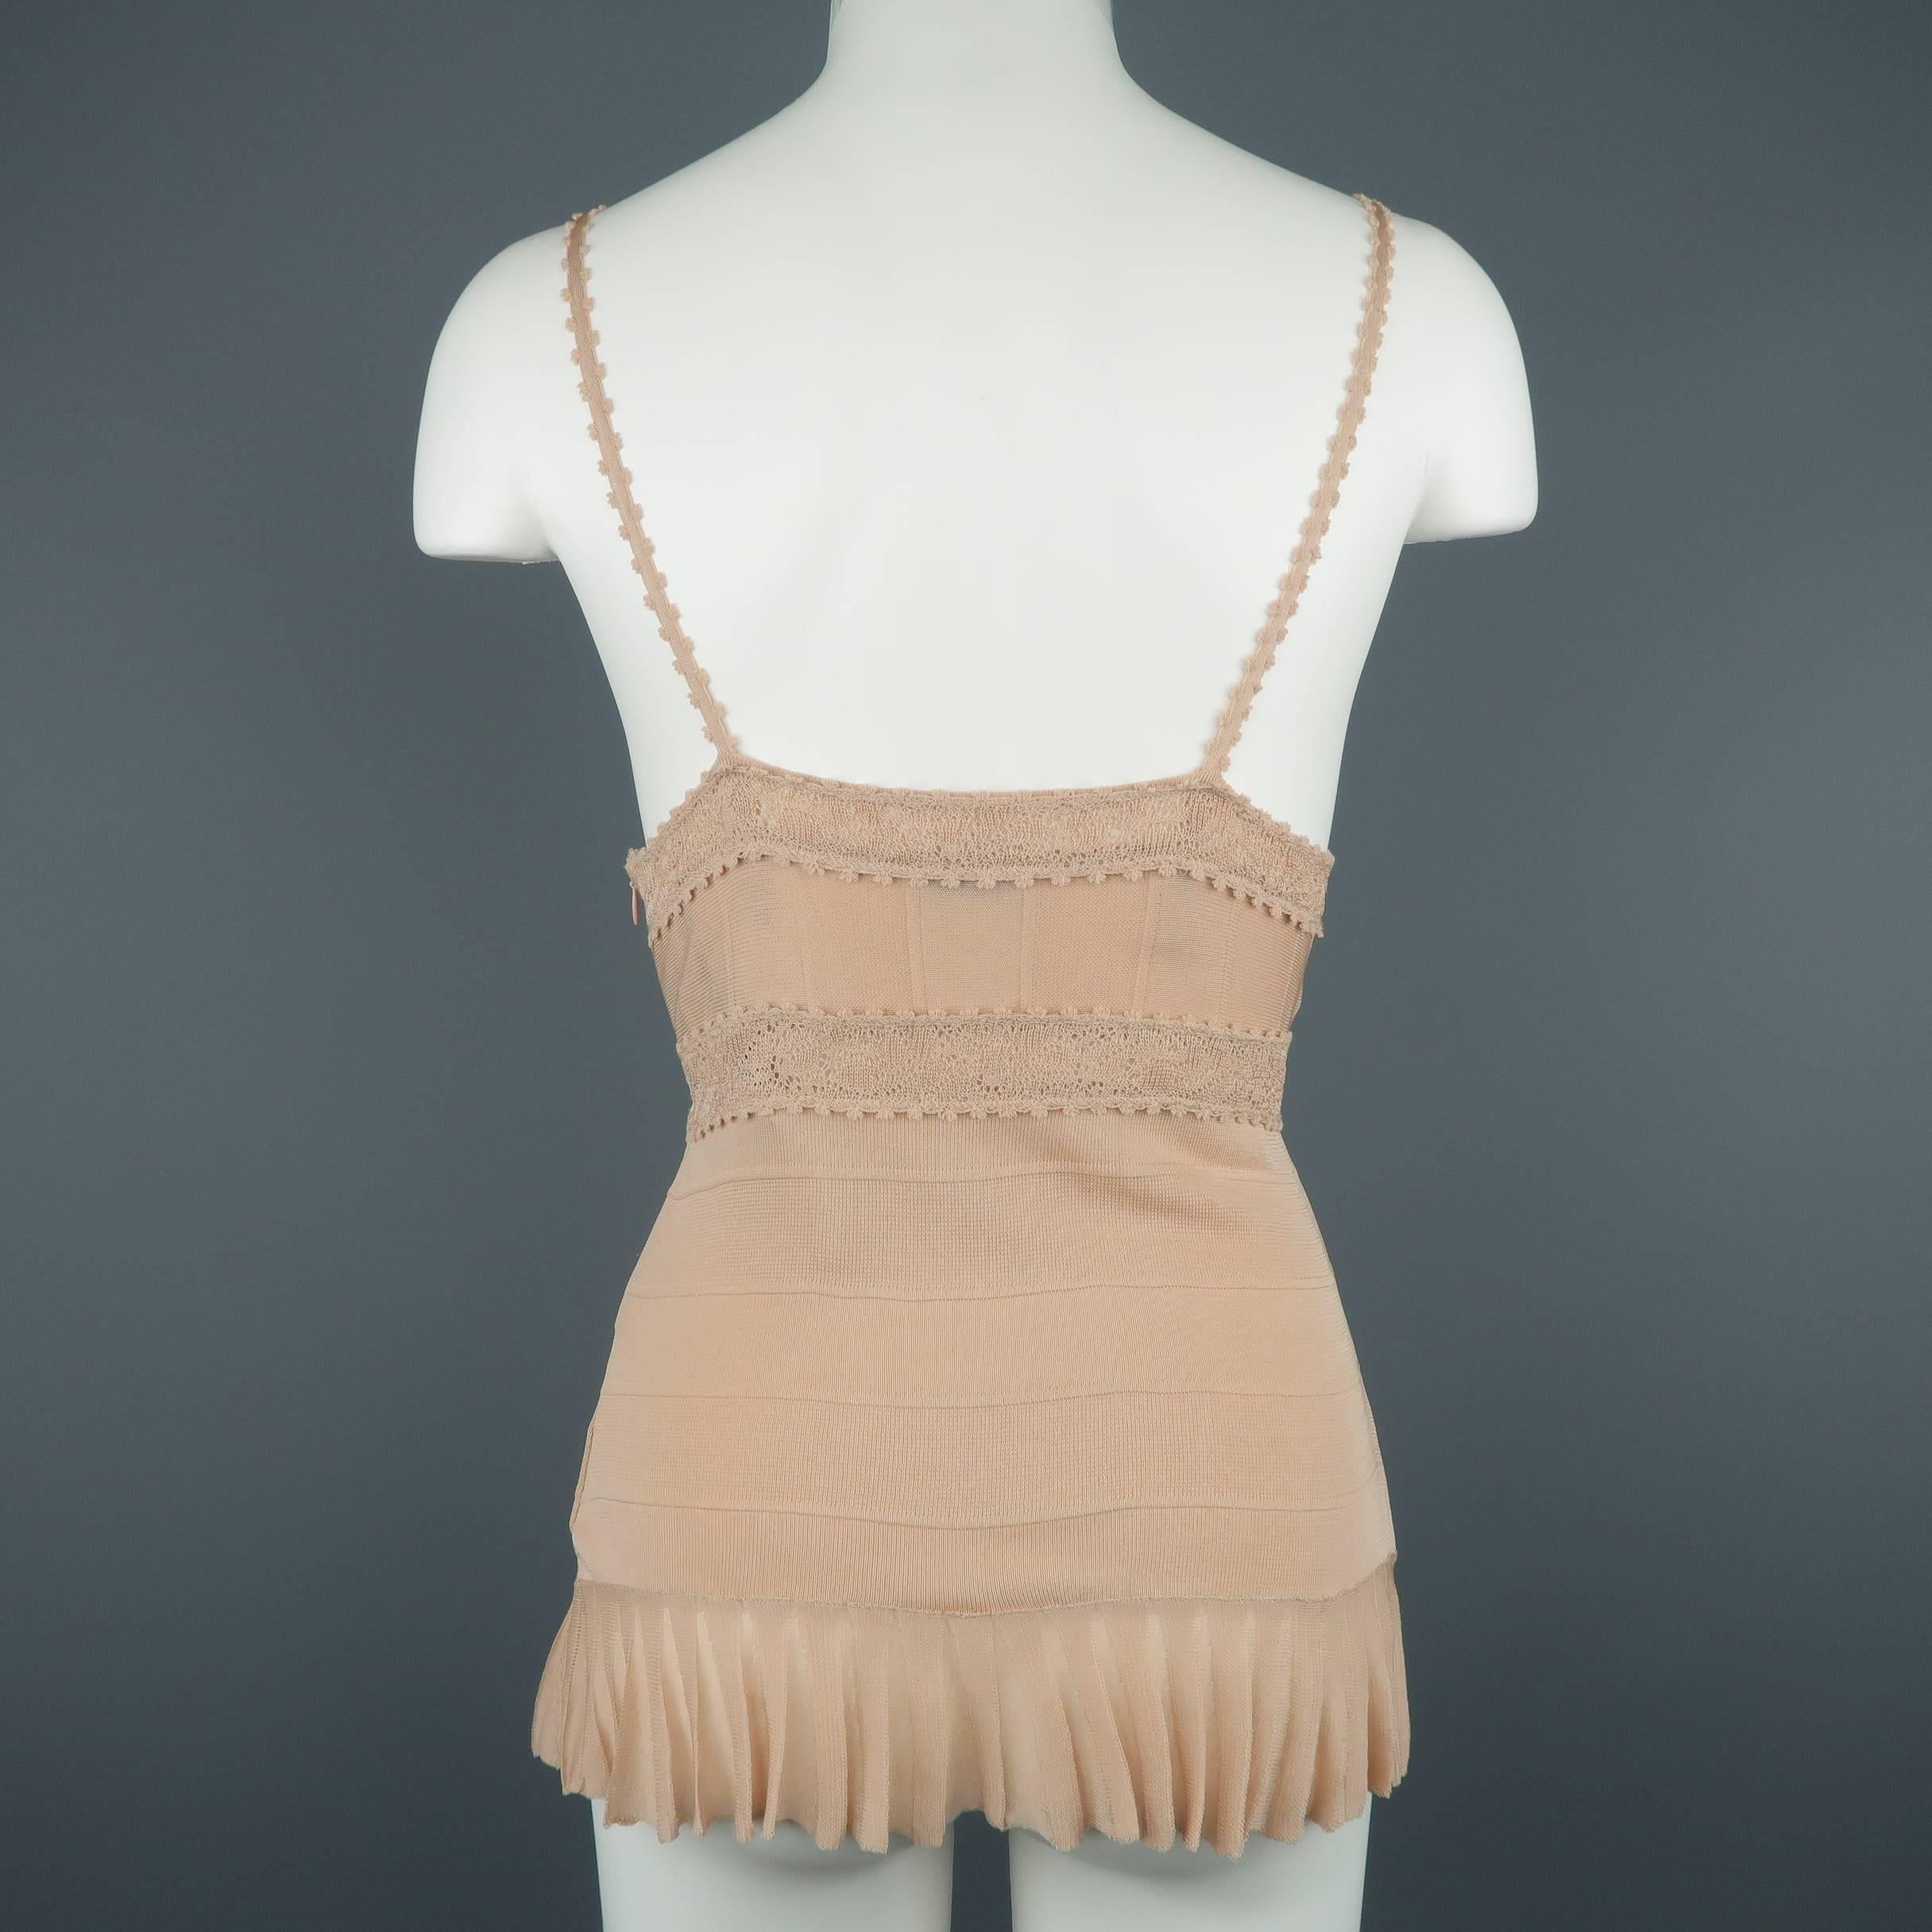 CHANEL Size 8 Pink Rayon Knit Pleated Camisole Dress Top 2